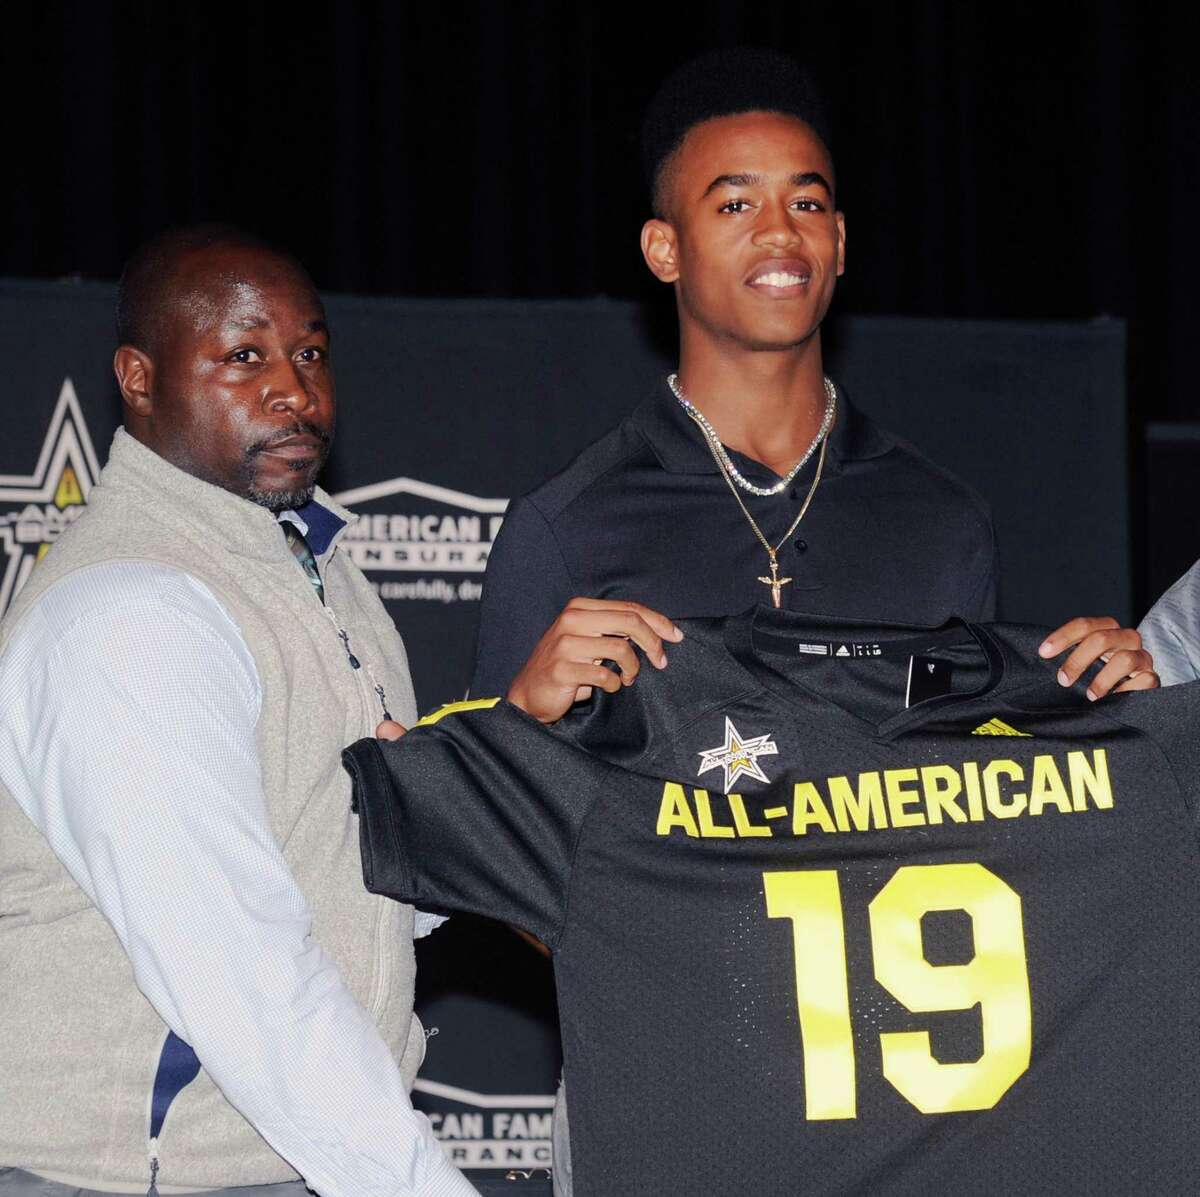 Brunswick School football player, Cornelius Johnson, right, a wide receiver, with his football coach, Jarrett Shine, during the presentation of Johnson's All-American football jersey from the organizers of the national All-American Bowl by American Family Insurance at Brunswick School where Johnson plays and is a senior at the school, Greenwich, Conn., Tuesday, Oct. 16, 2018. The bowl game will be played in San Antonio on January 5, 2019.